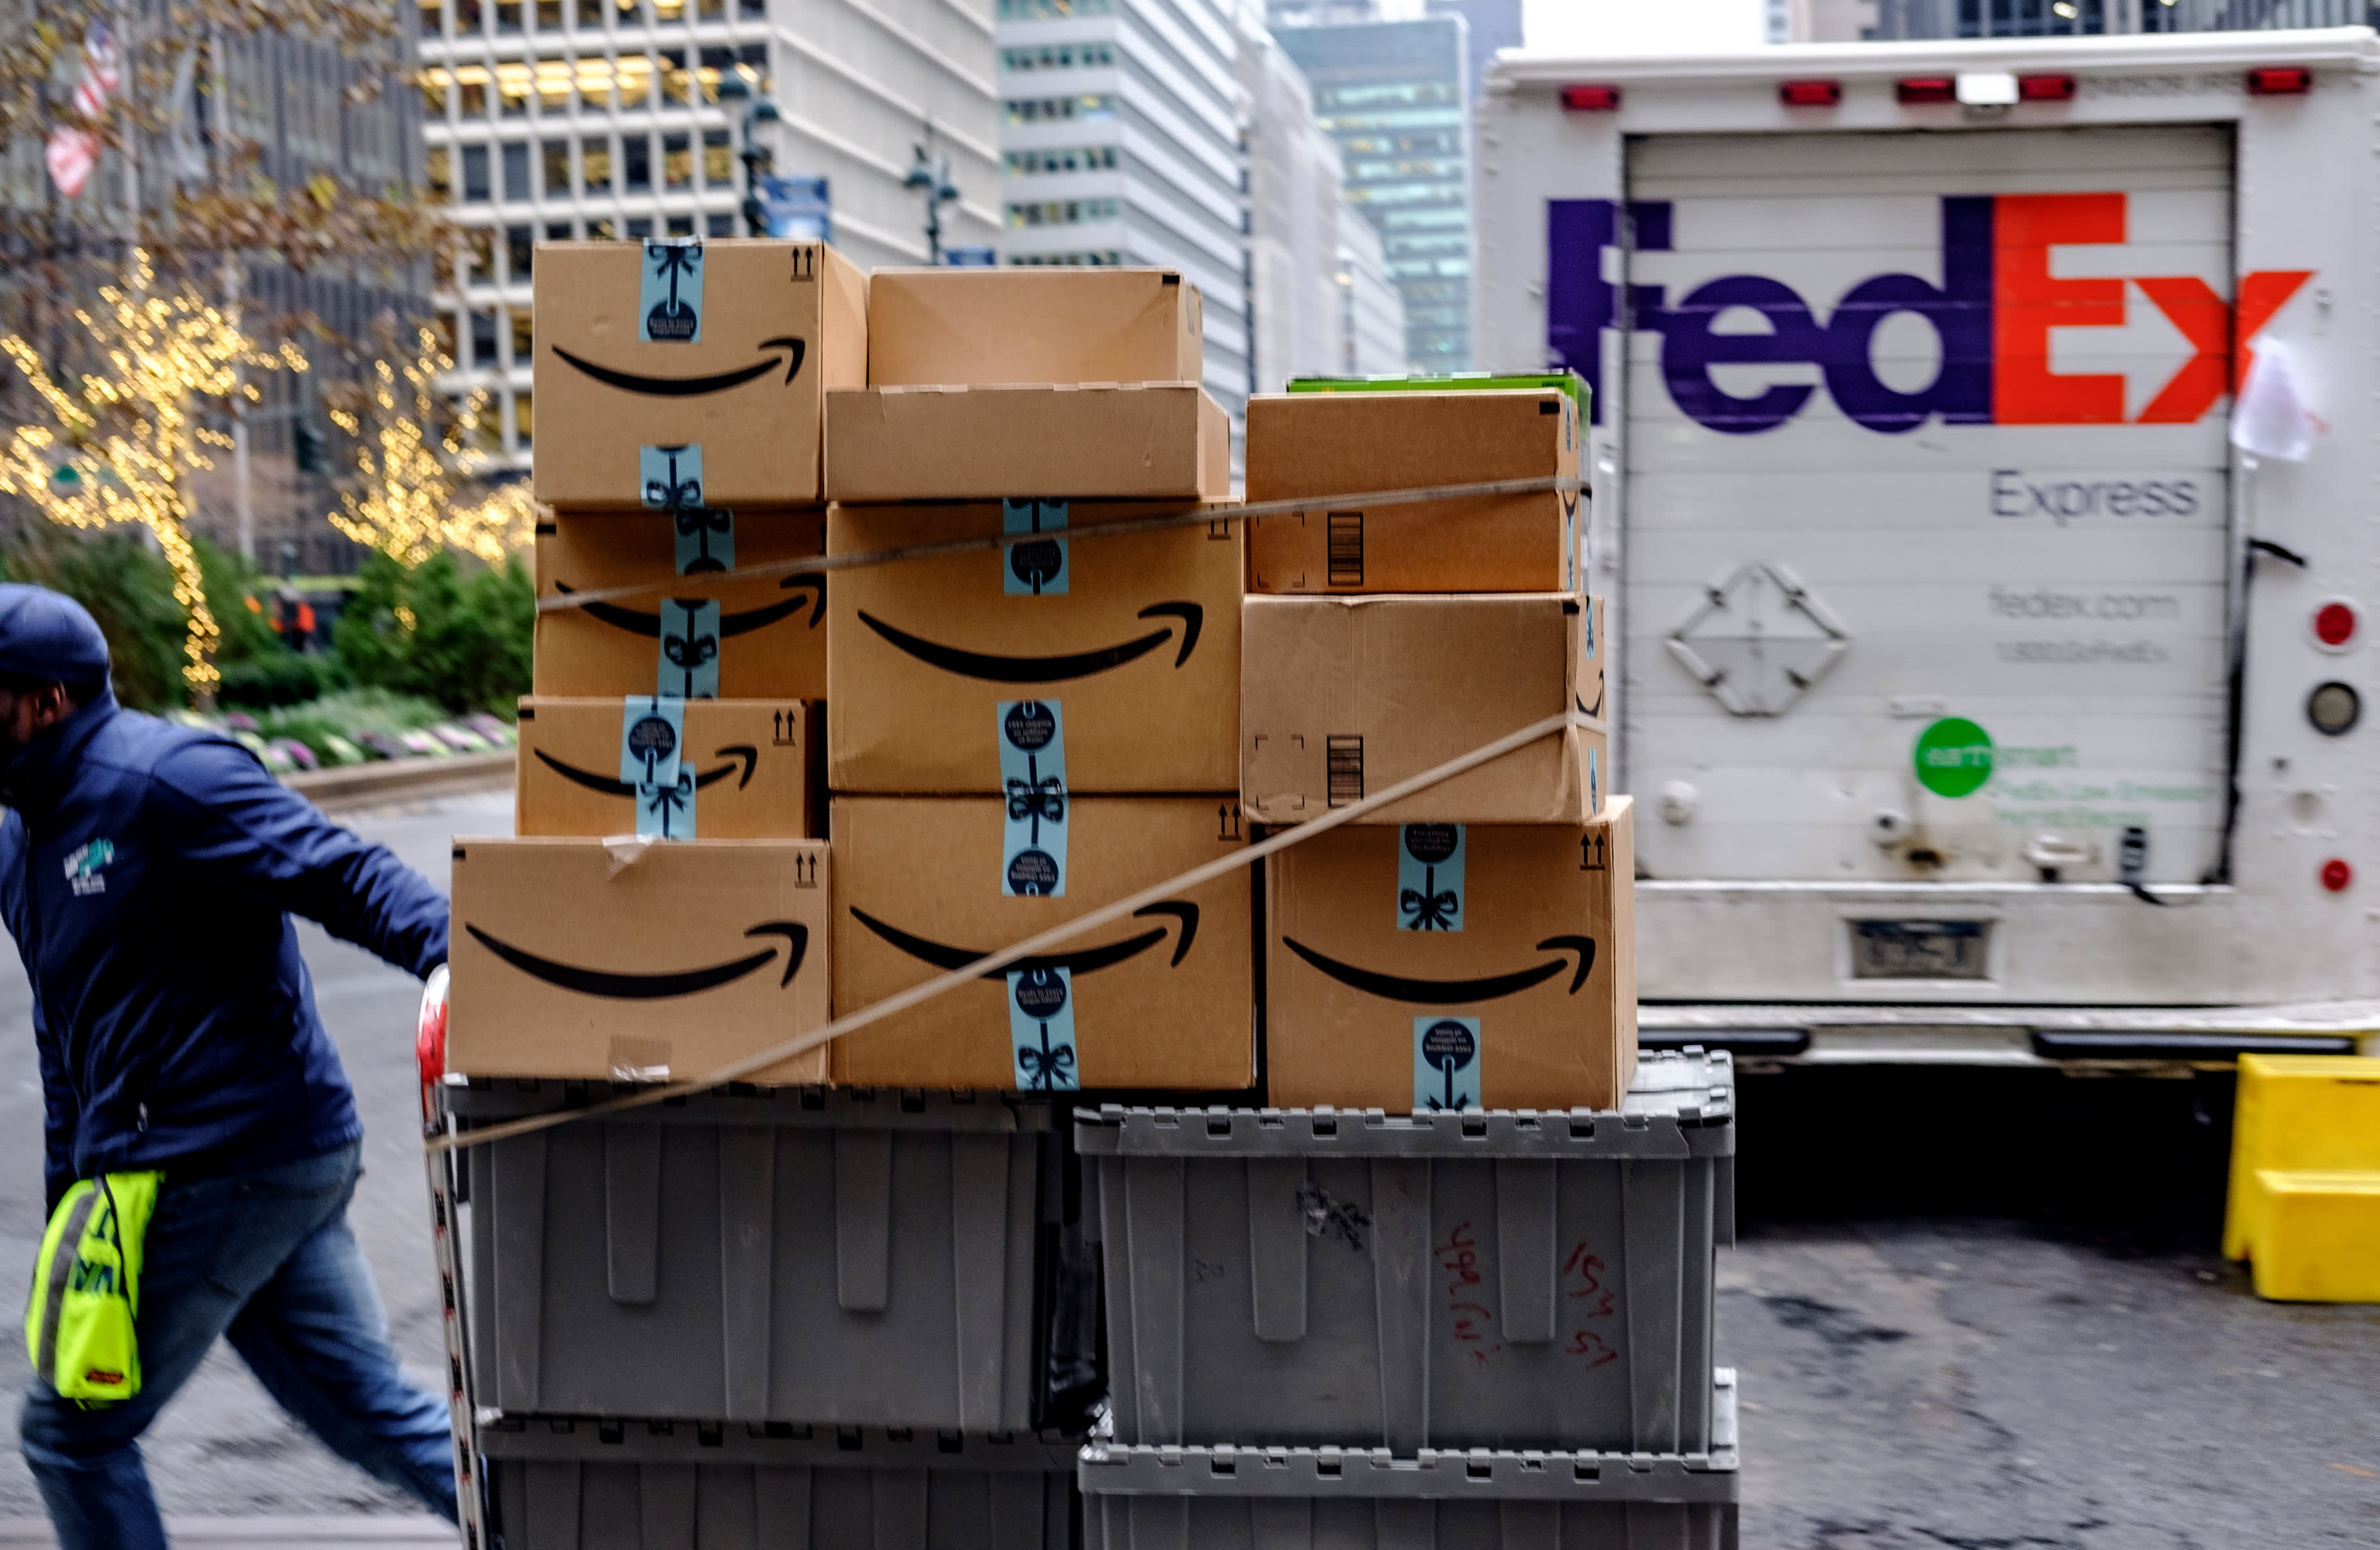 FedEx is ending grounddelivery contract with Amazon